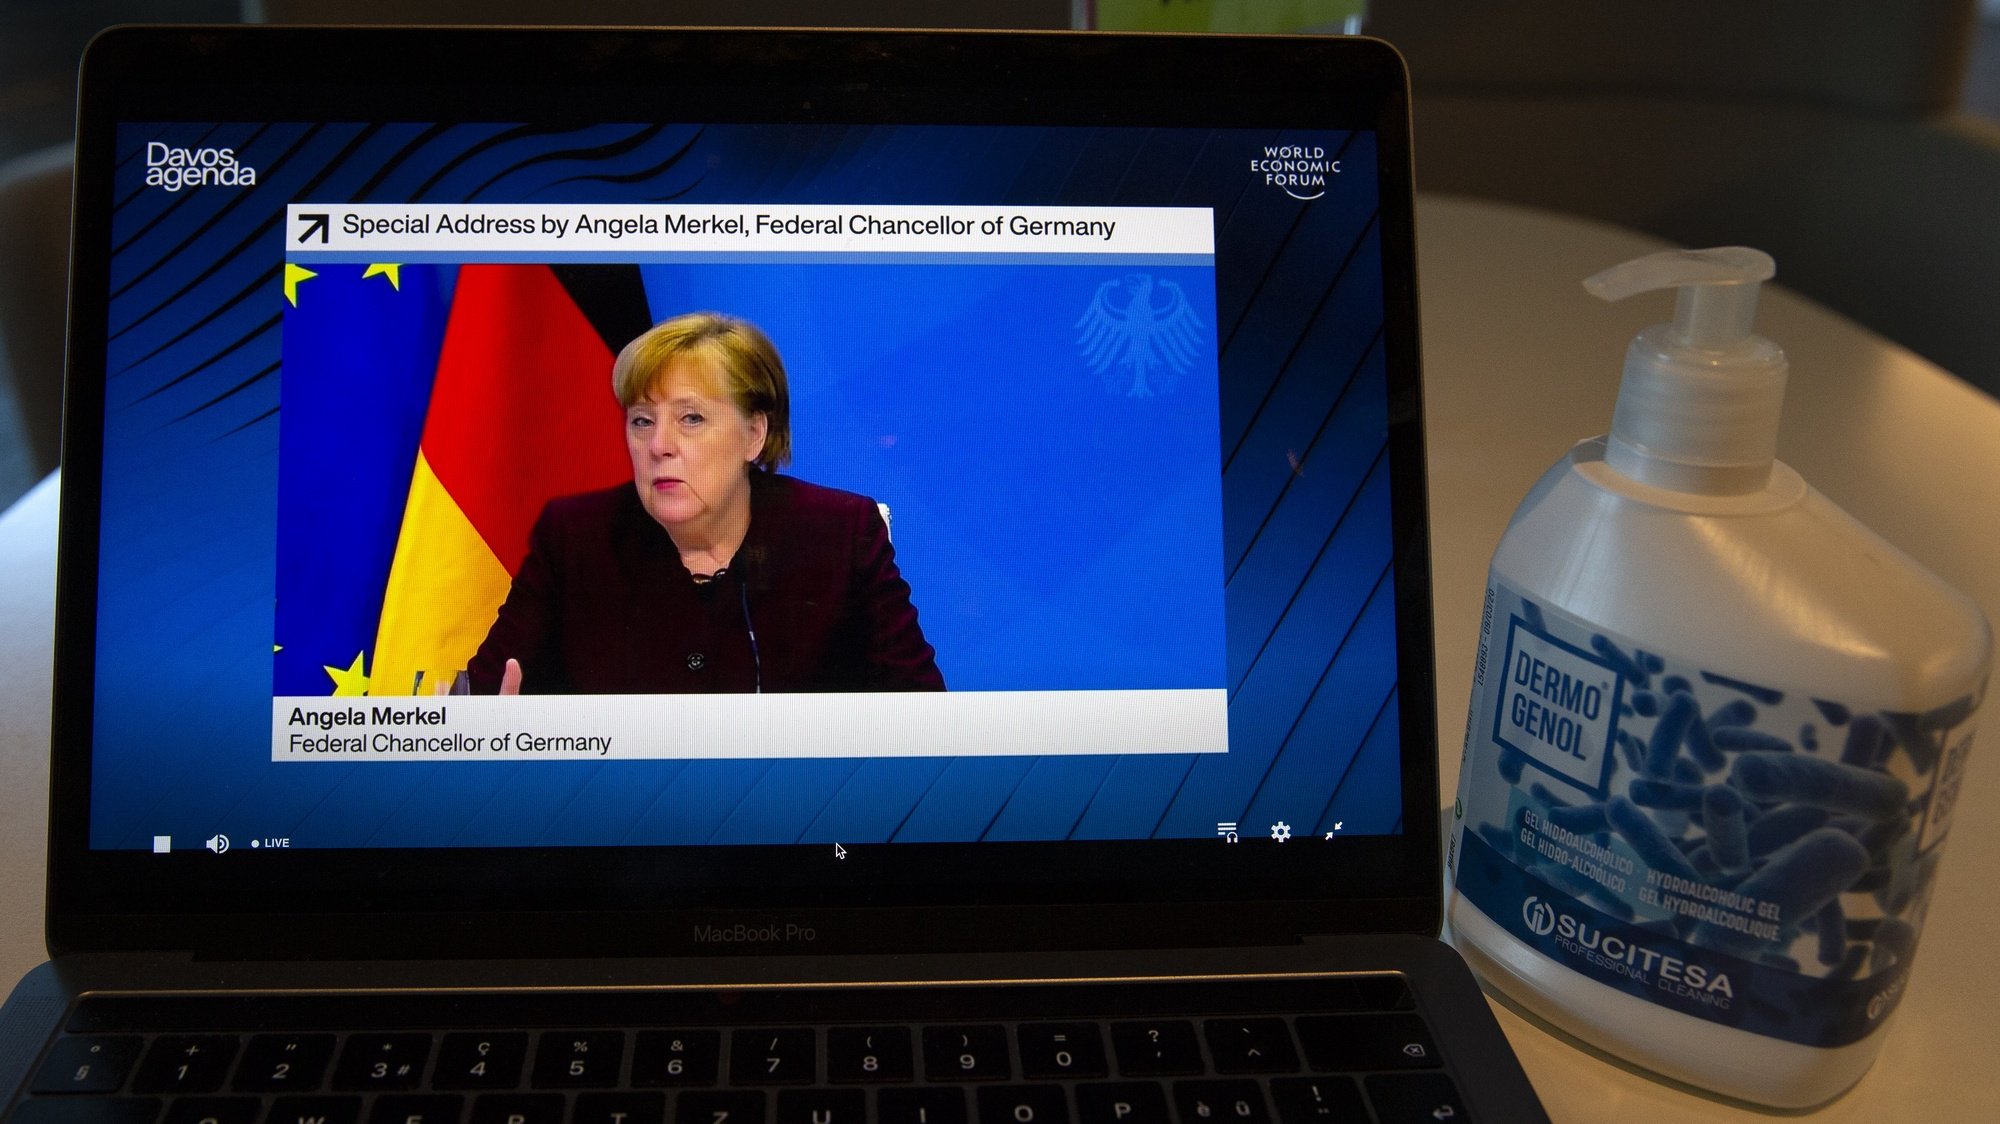 epa08966411 A screen shows German Chancellor Angela Merkel addressing her statement during a videoconference at the Davos Agenda, in Cologny near Geneva, Switzerland, 26 January 2021. The Davos Agenda, from 25 to 29 January 2021, is talking place in an online format due to the coronavirus pandemic.  EPA/SALVATORE DI NOLFI